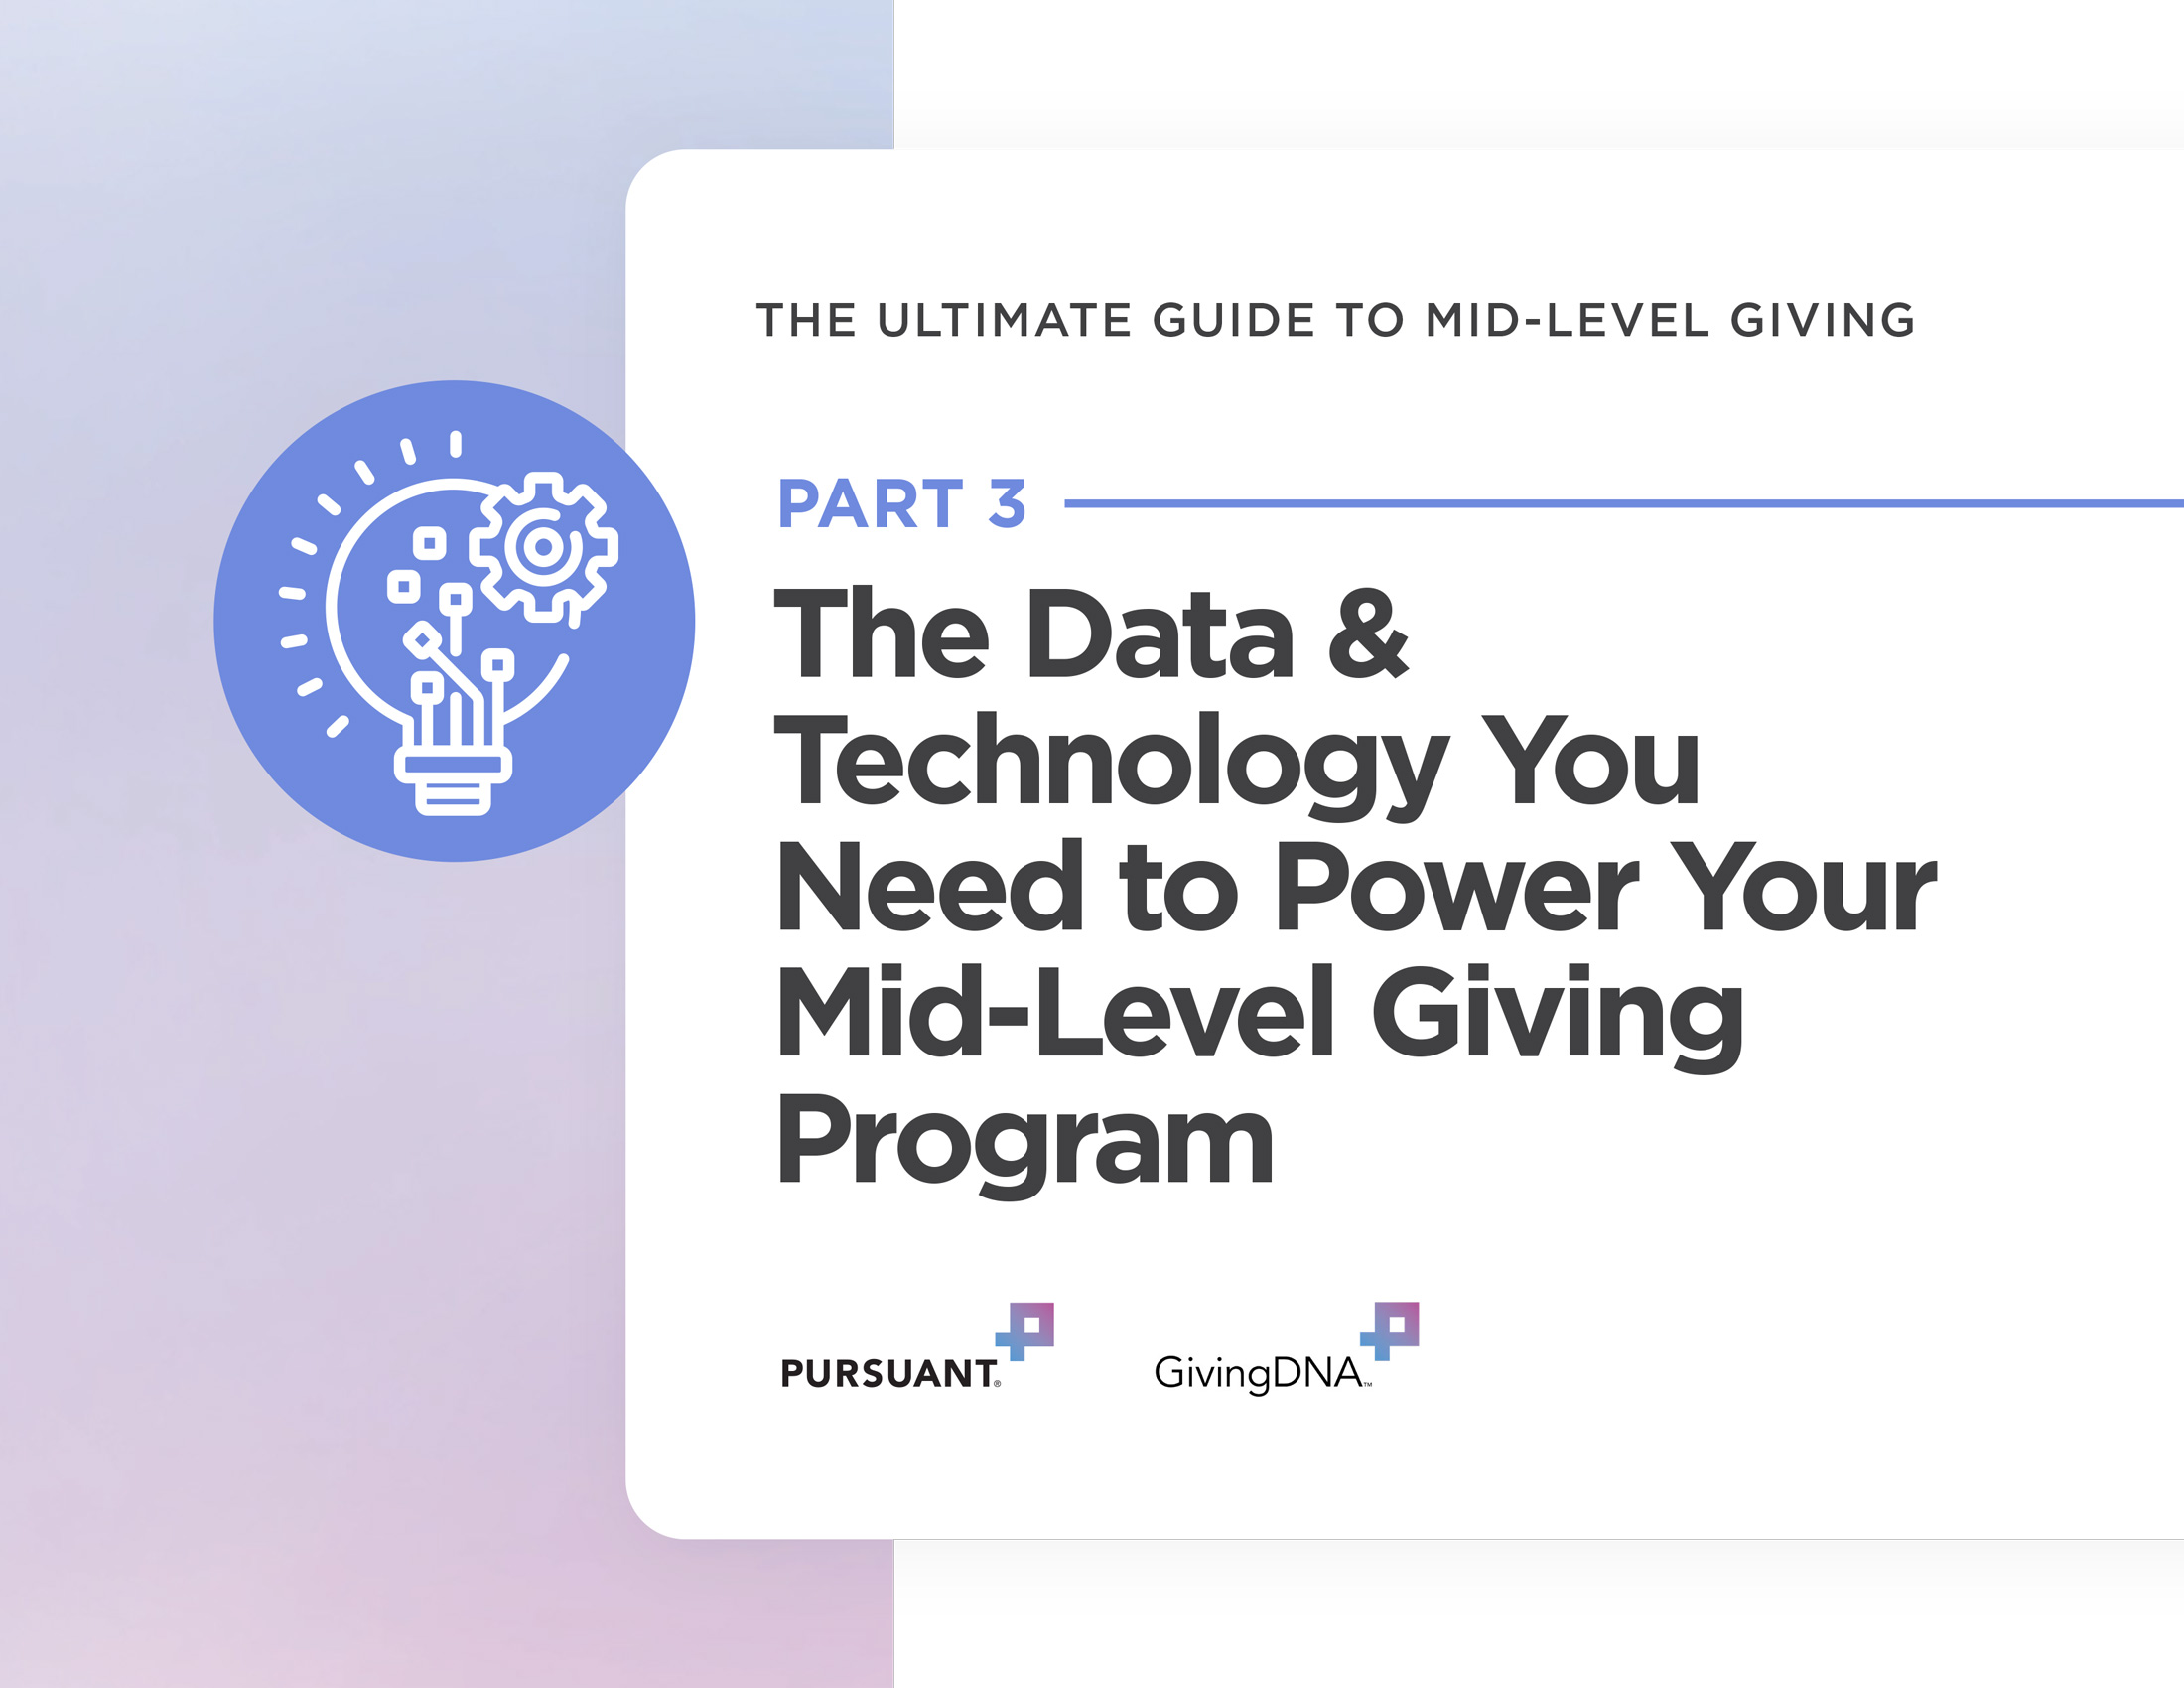 The Ultimate Guide to Mid-Level Giving Part 3: Data & Technology You Need to Power Your Mid-Level Giving Program